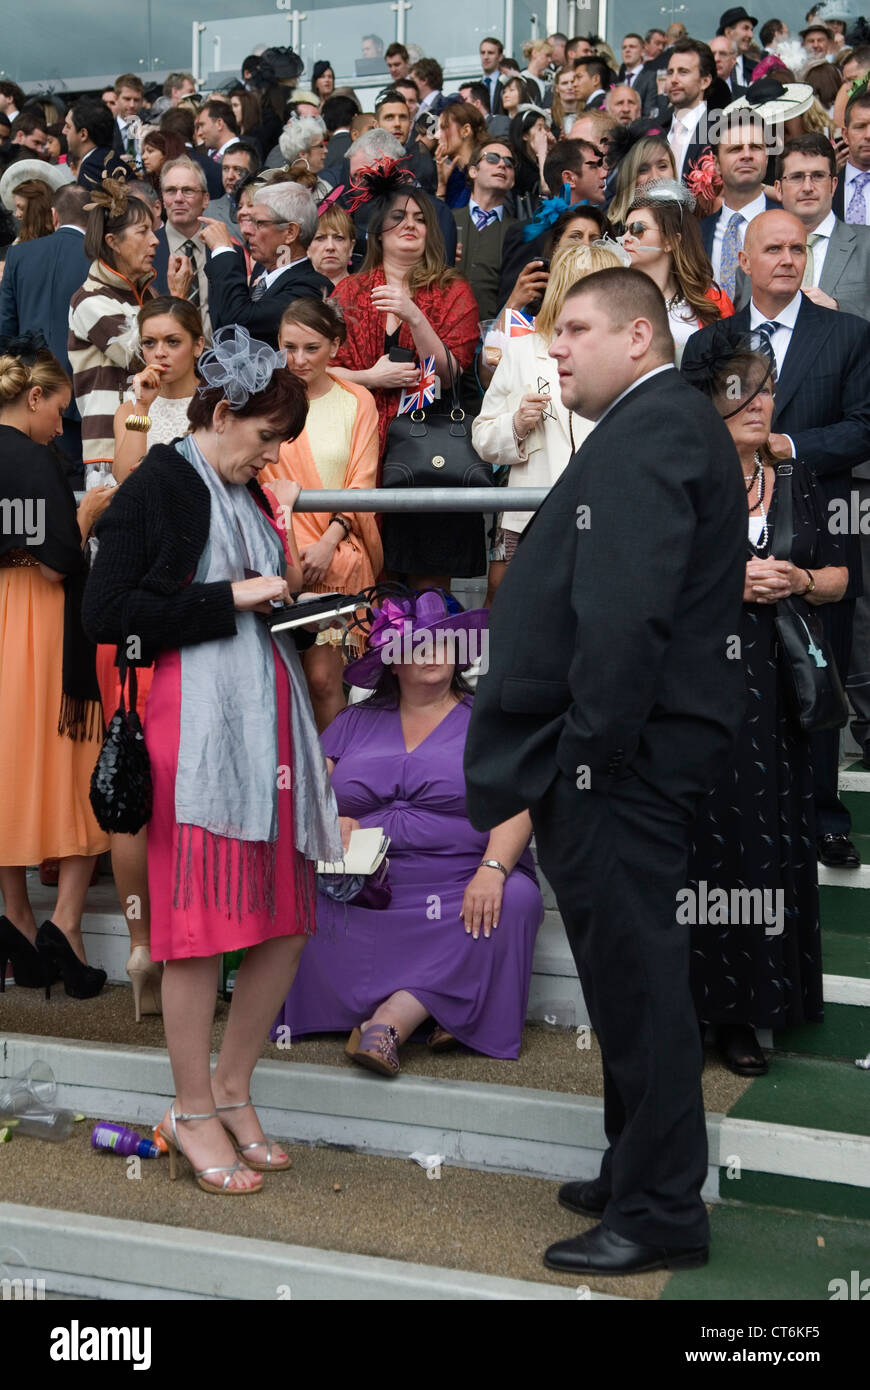 Tired overweight fat woman sitting down exhausted at Royal Ascot horse racing Berkshire. 2012, 2010s UK HOMER SYKES Stock Photo